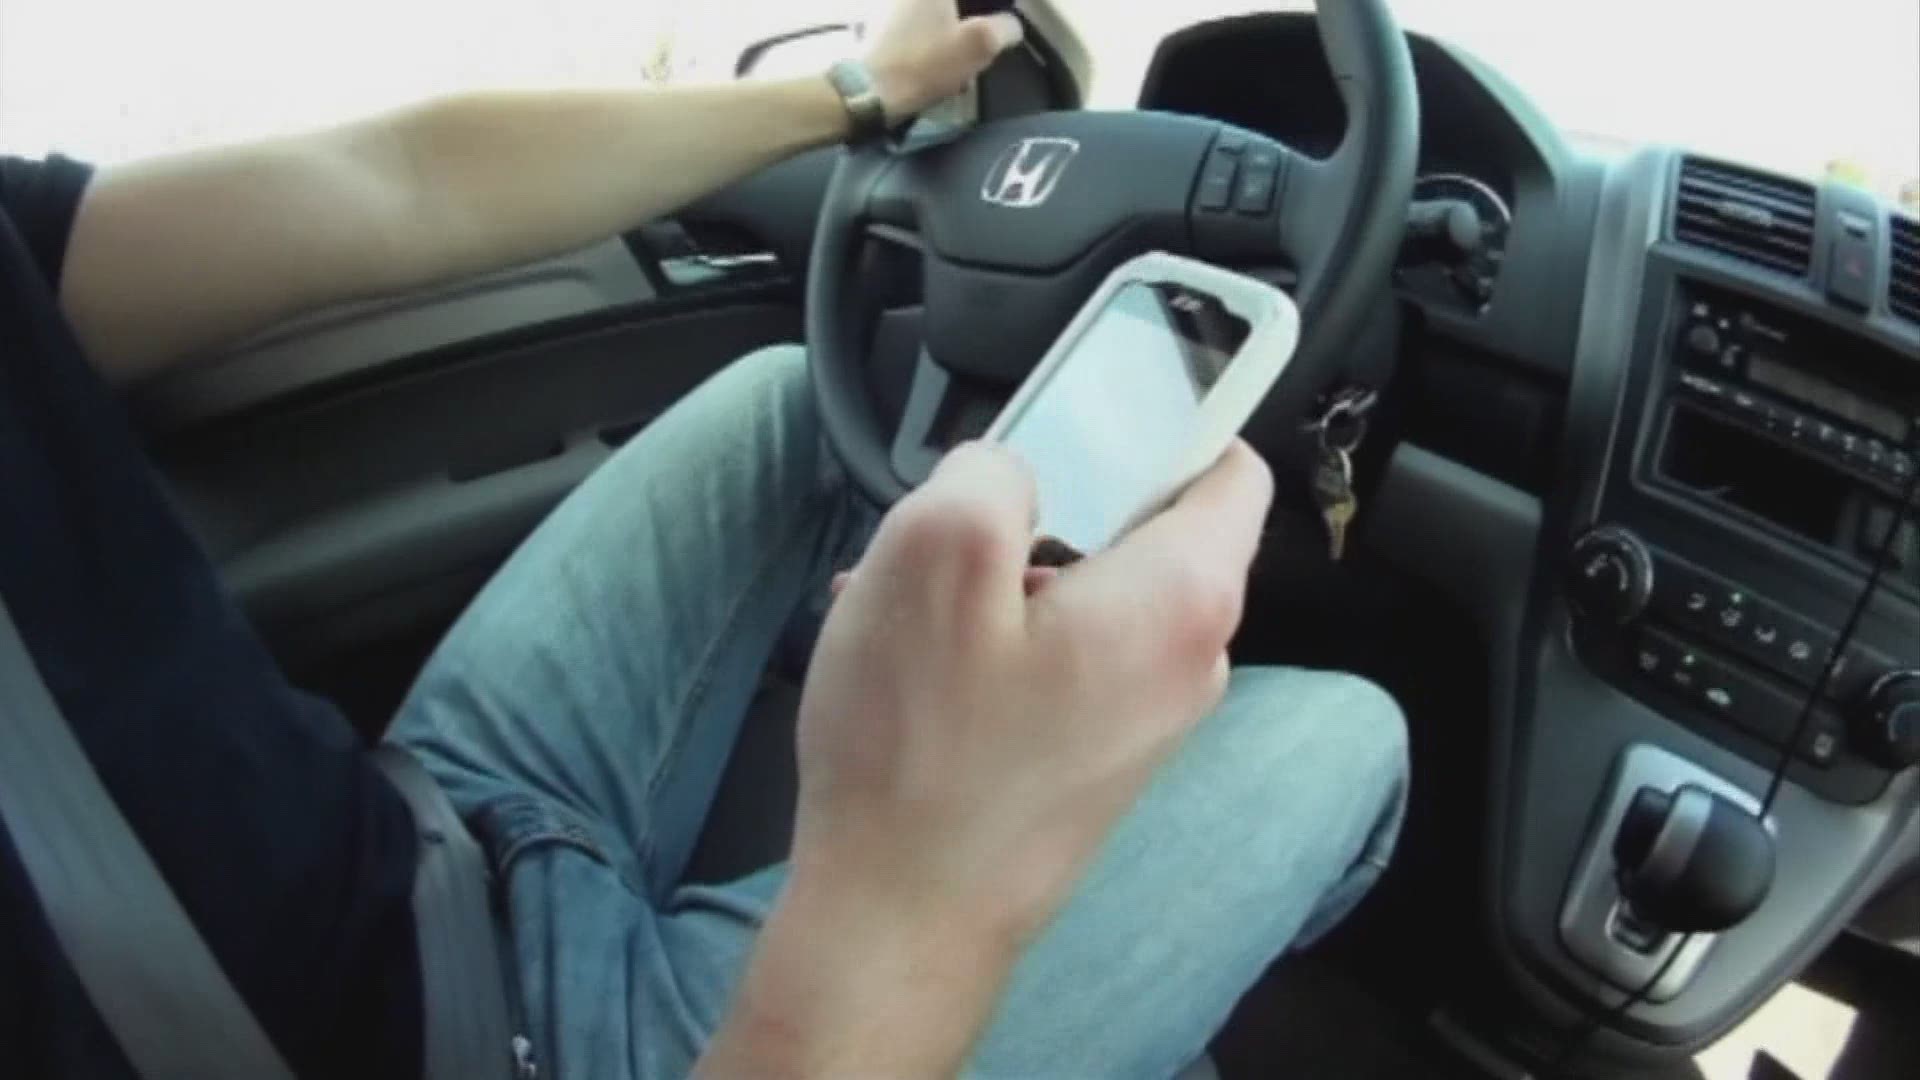 Governor proposes provisions for keeping cell phones out of Ohio driver's hands.